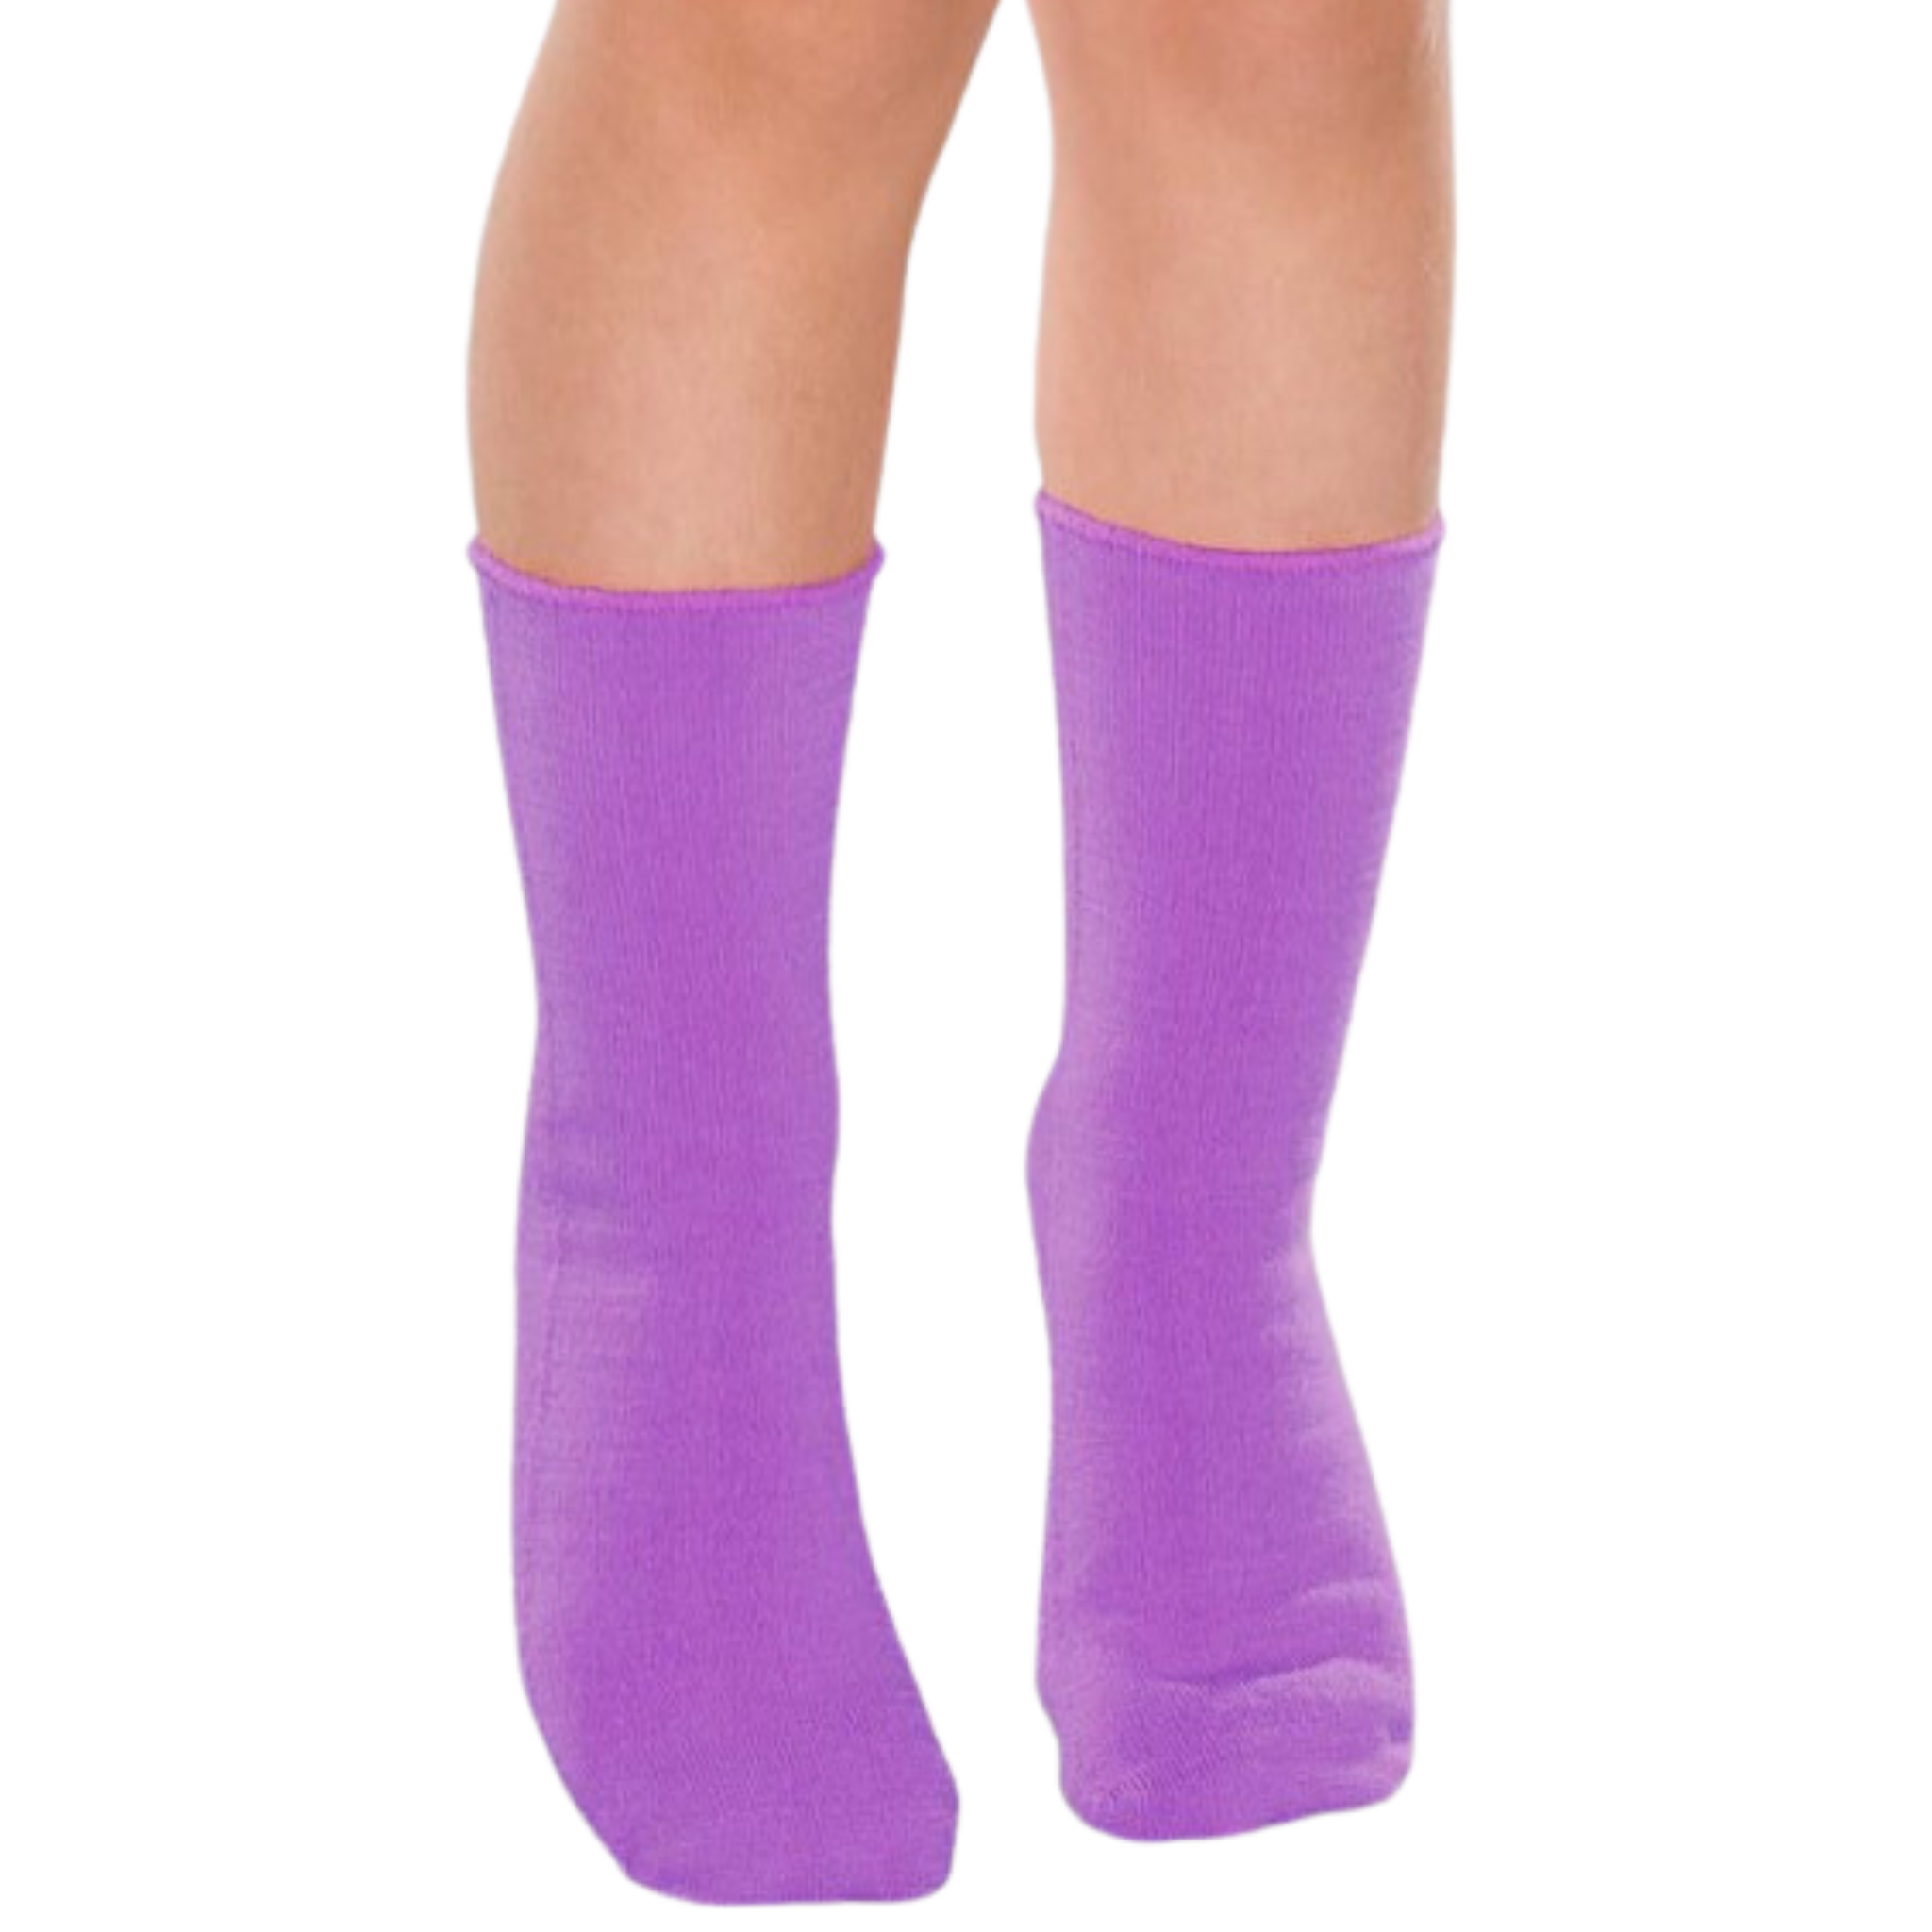 SmartKnitKIDS - Absolutely Seamless Socks - Ultimate comfort sock (6-pack)